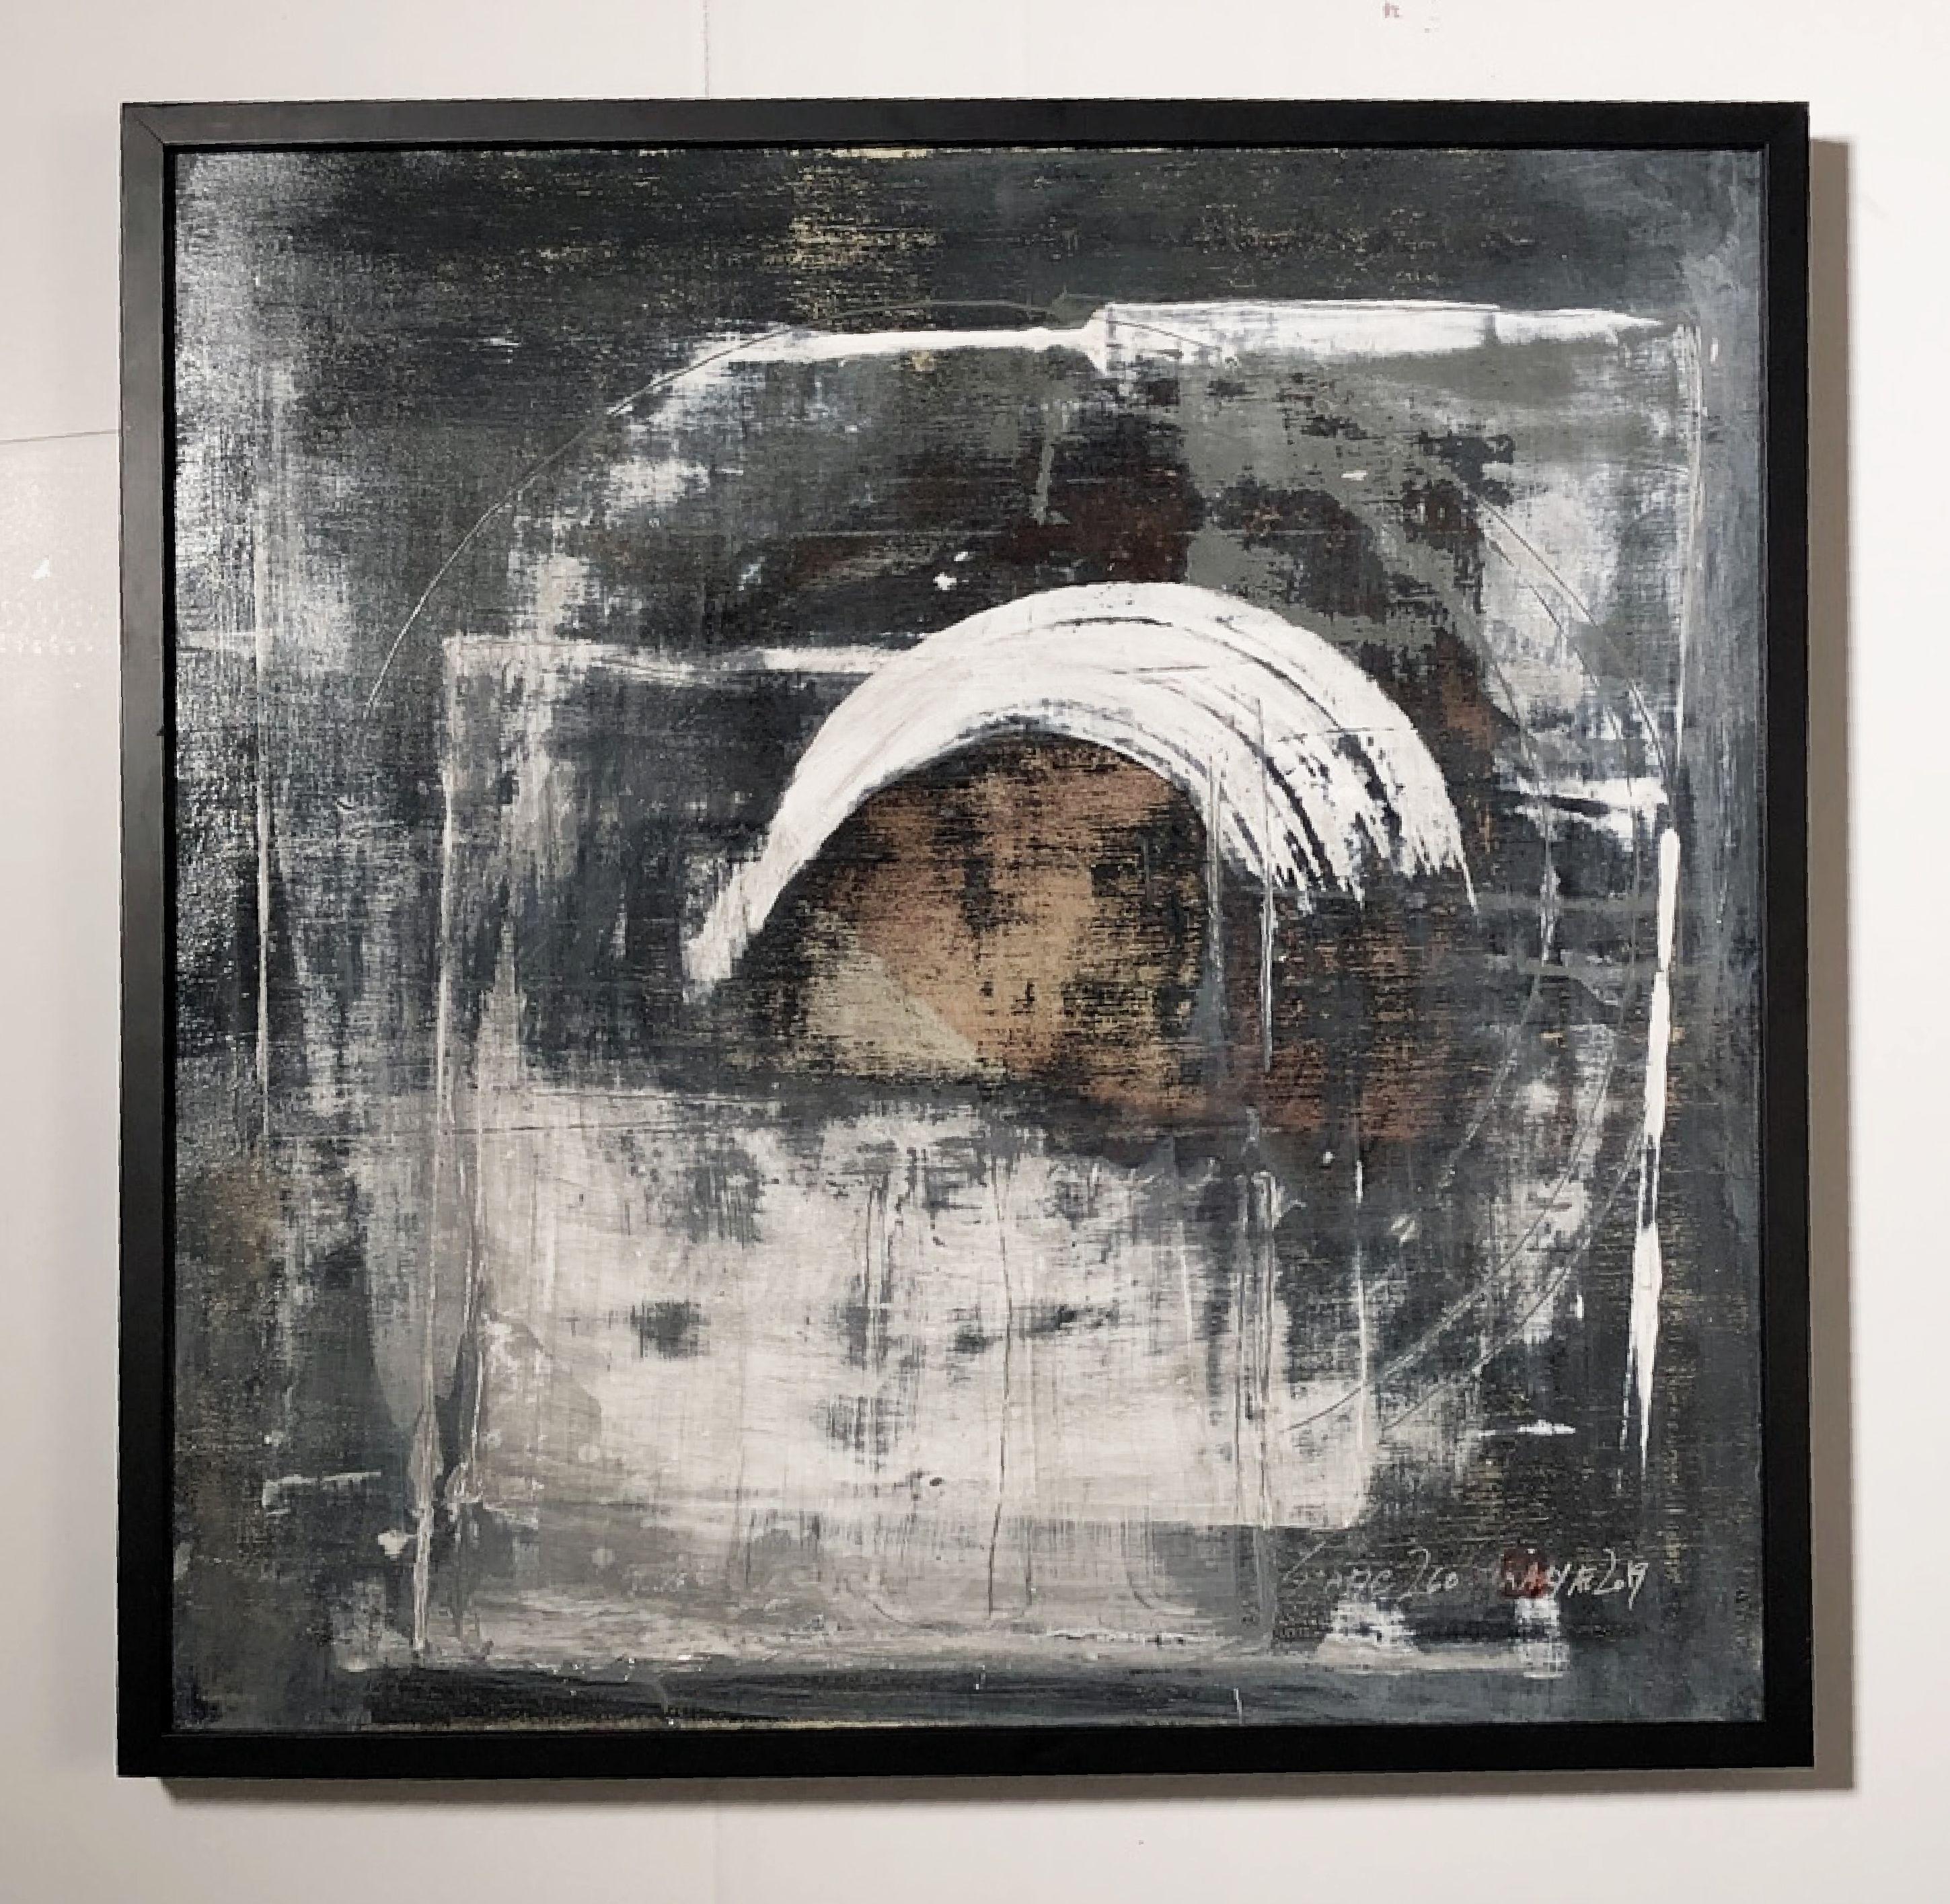 Elegant, heavyweight canvas is treated with multiple layers of varnish, hand painted with acrylic ink aged by sanding to create visual metaphors.   Stunning shades of white and gray are contrasted in this one of a kind abstract painting  Painting is